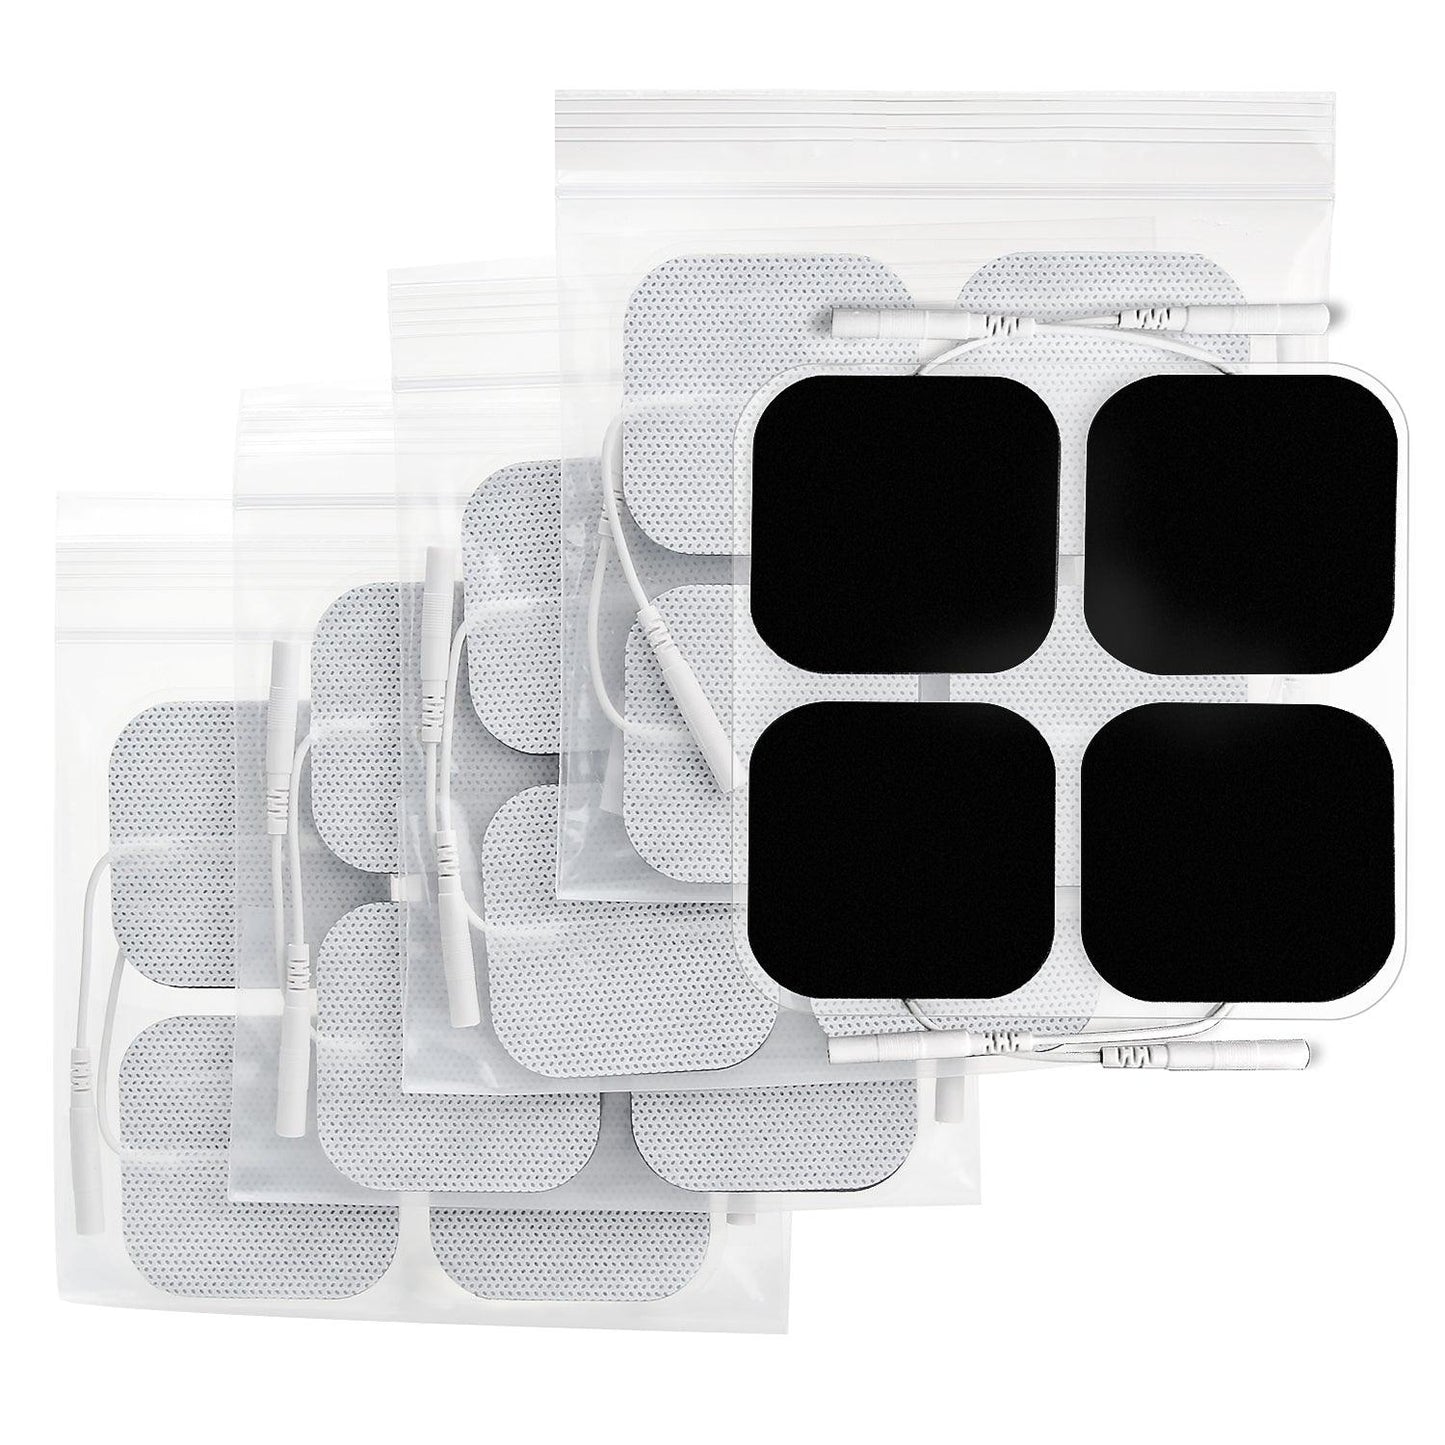 https://auvonhealth.com/cdn/shop/files/auvon-tens-unit-pads-2-x2-20-pcs-3rd-gen-latex-free-replacement-pads-electrode-patches-with-upgraded-self-stick-performance-and-non-irritating-design-for-electrotherapy-auvon-1.jpg?v=1686019675&width=1445